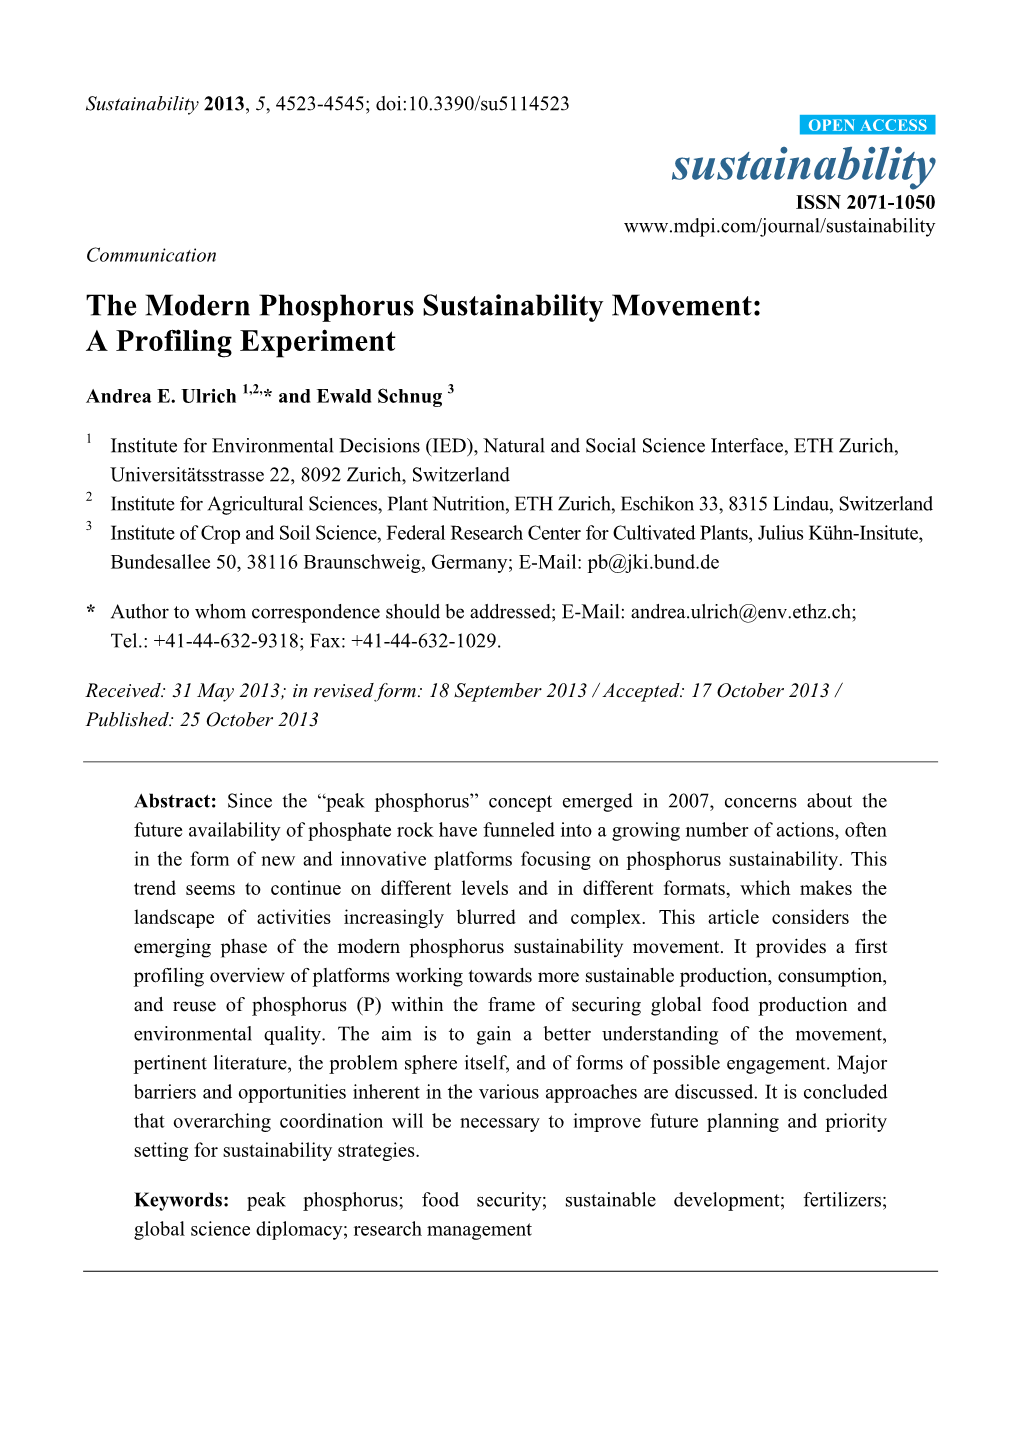 The Modern Phosphorus Sustainability Movement: a Profiling Experiment